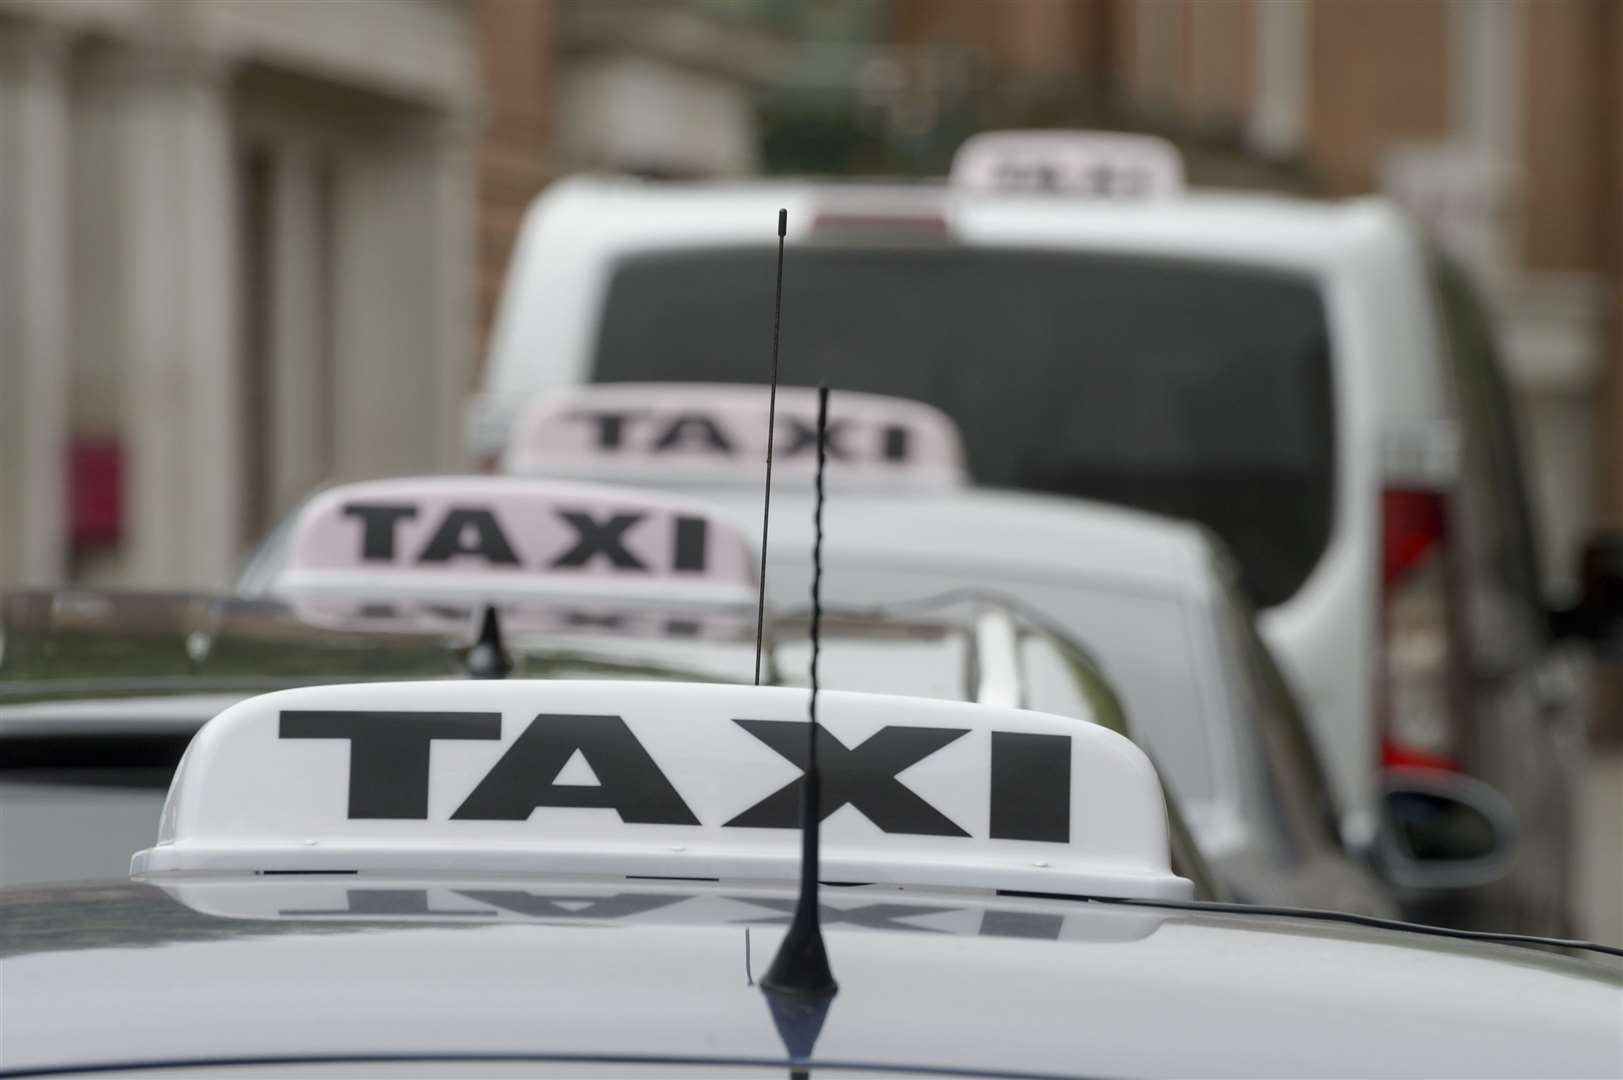 The taxi company pulled out on March 10